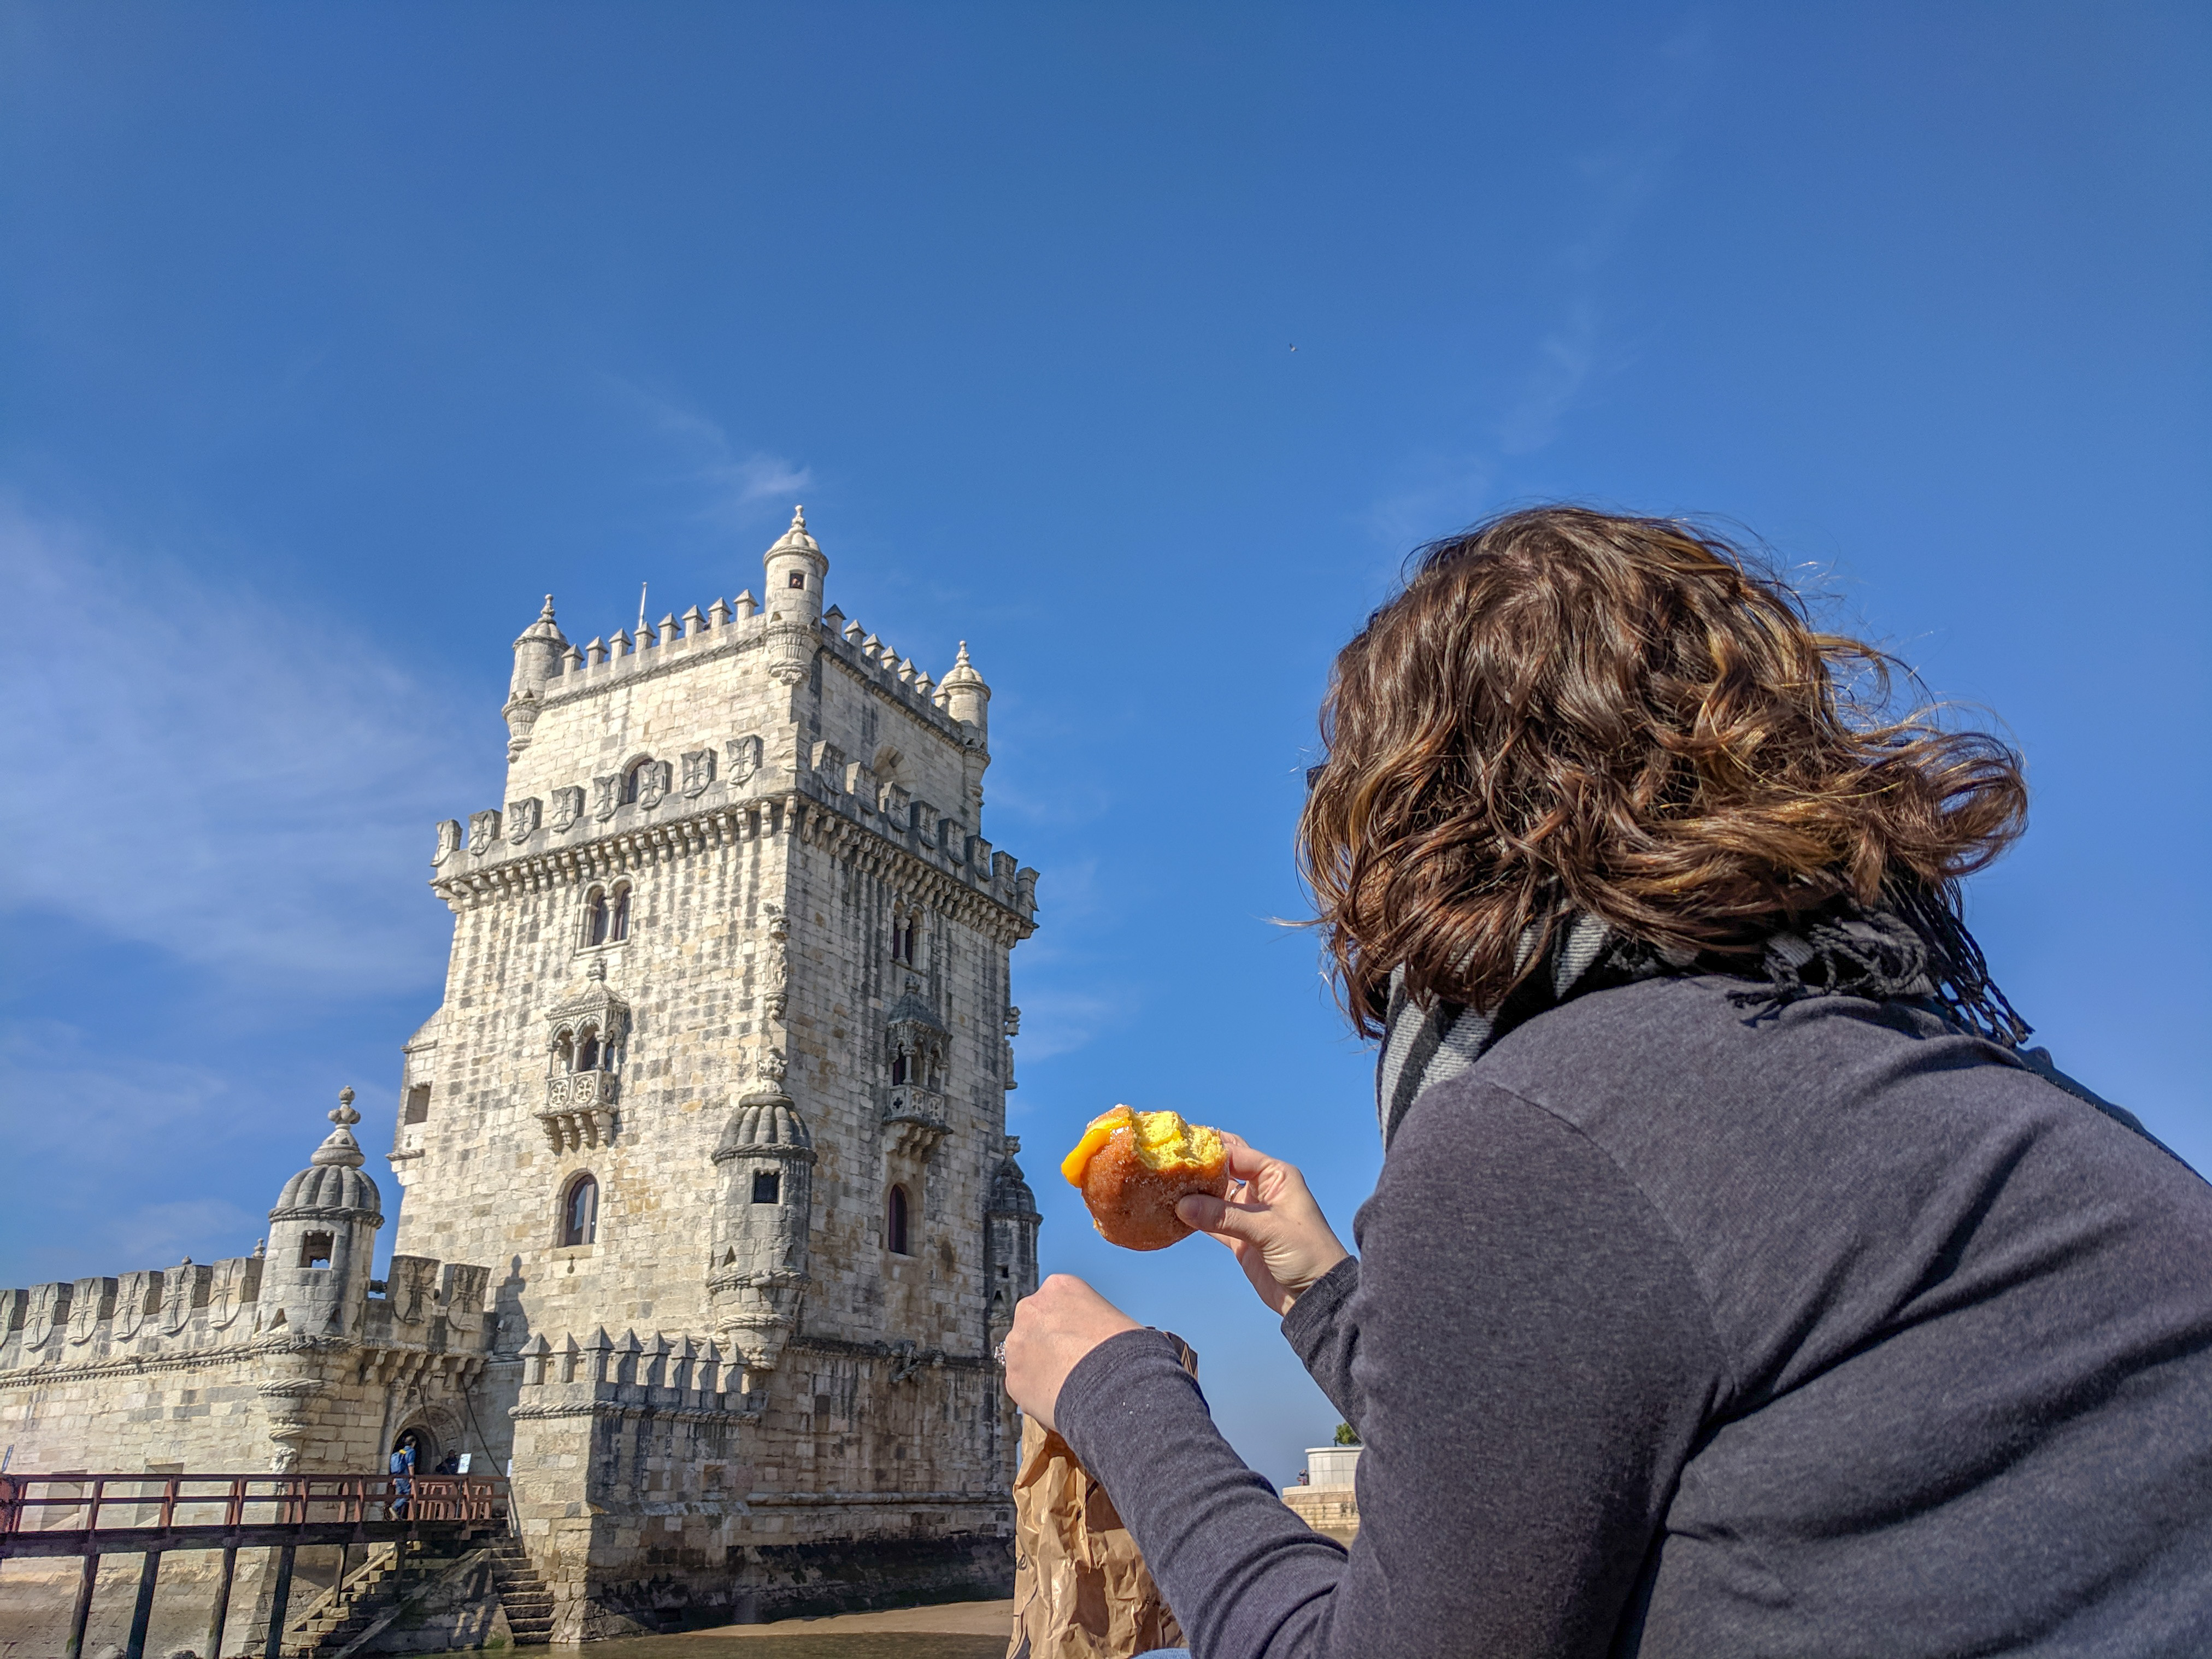 eating a pastry @ Belém Tower